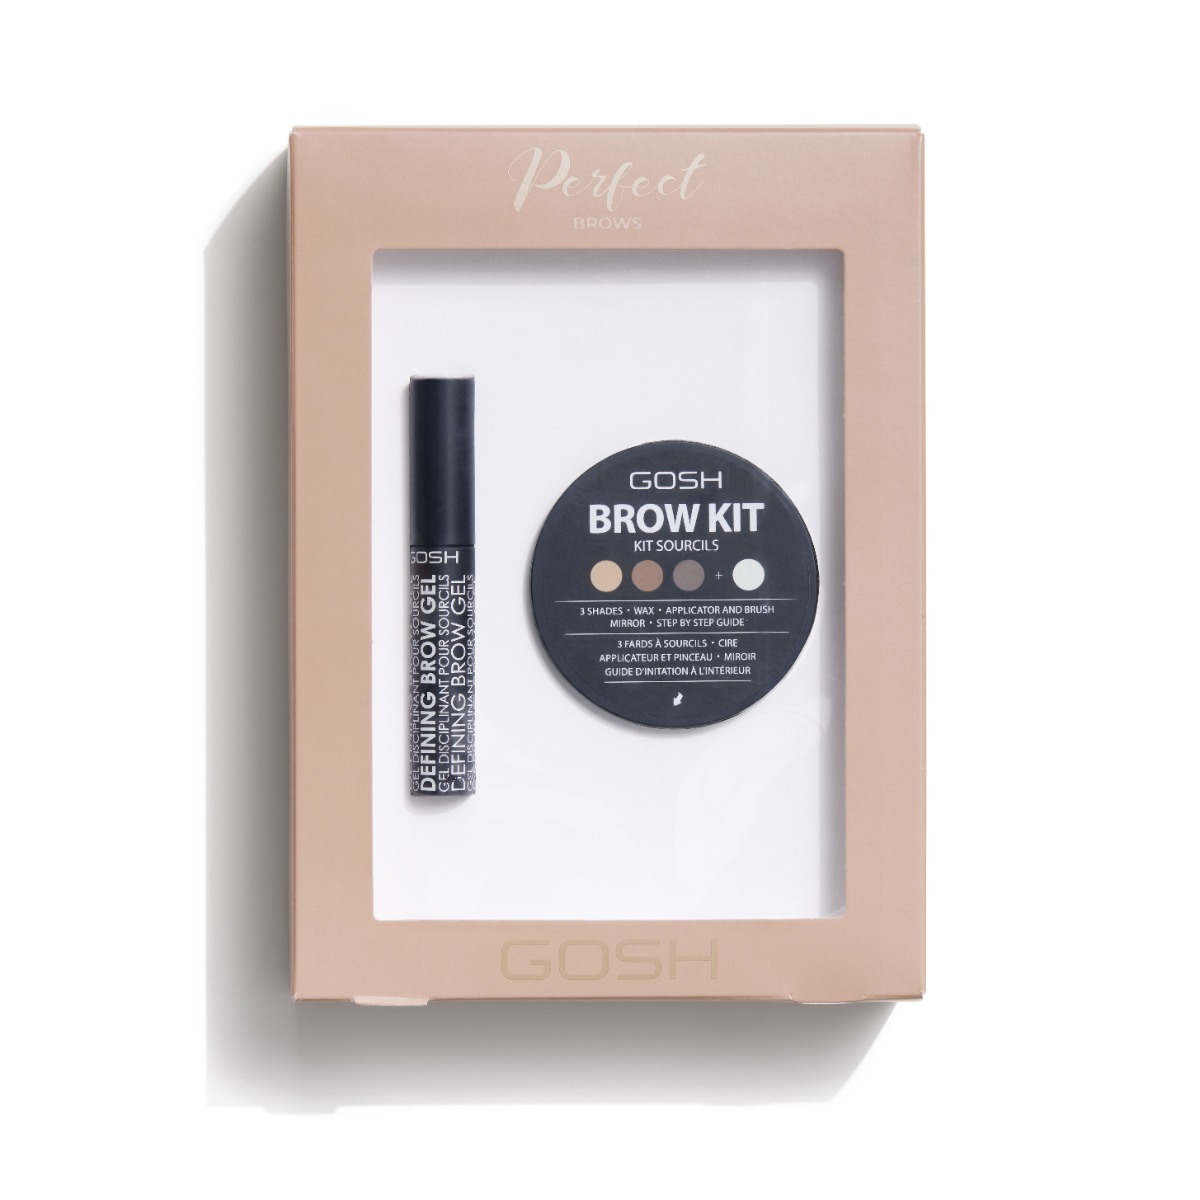 Perfect Brows Gift Box